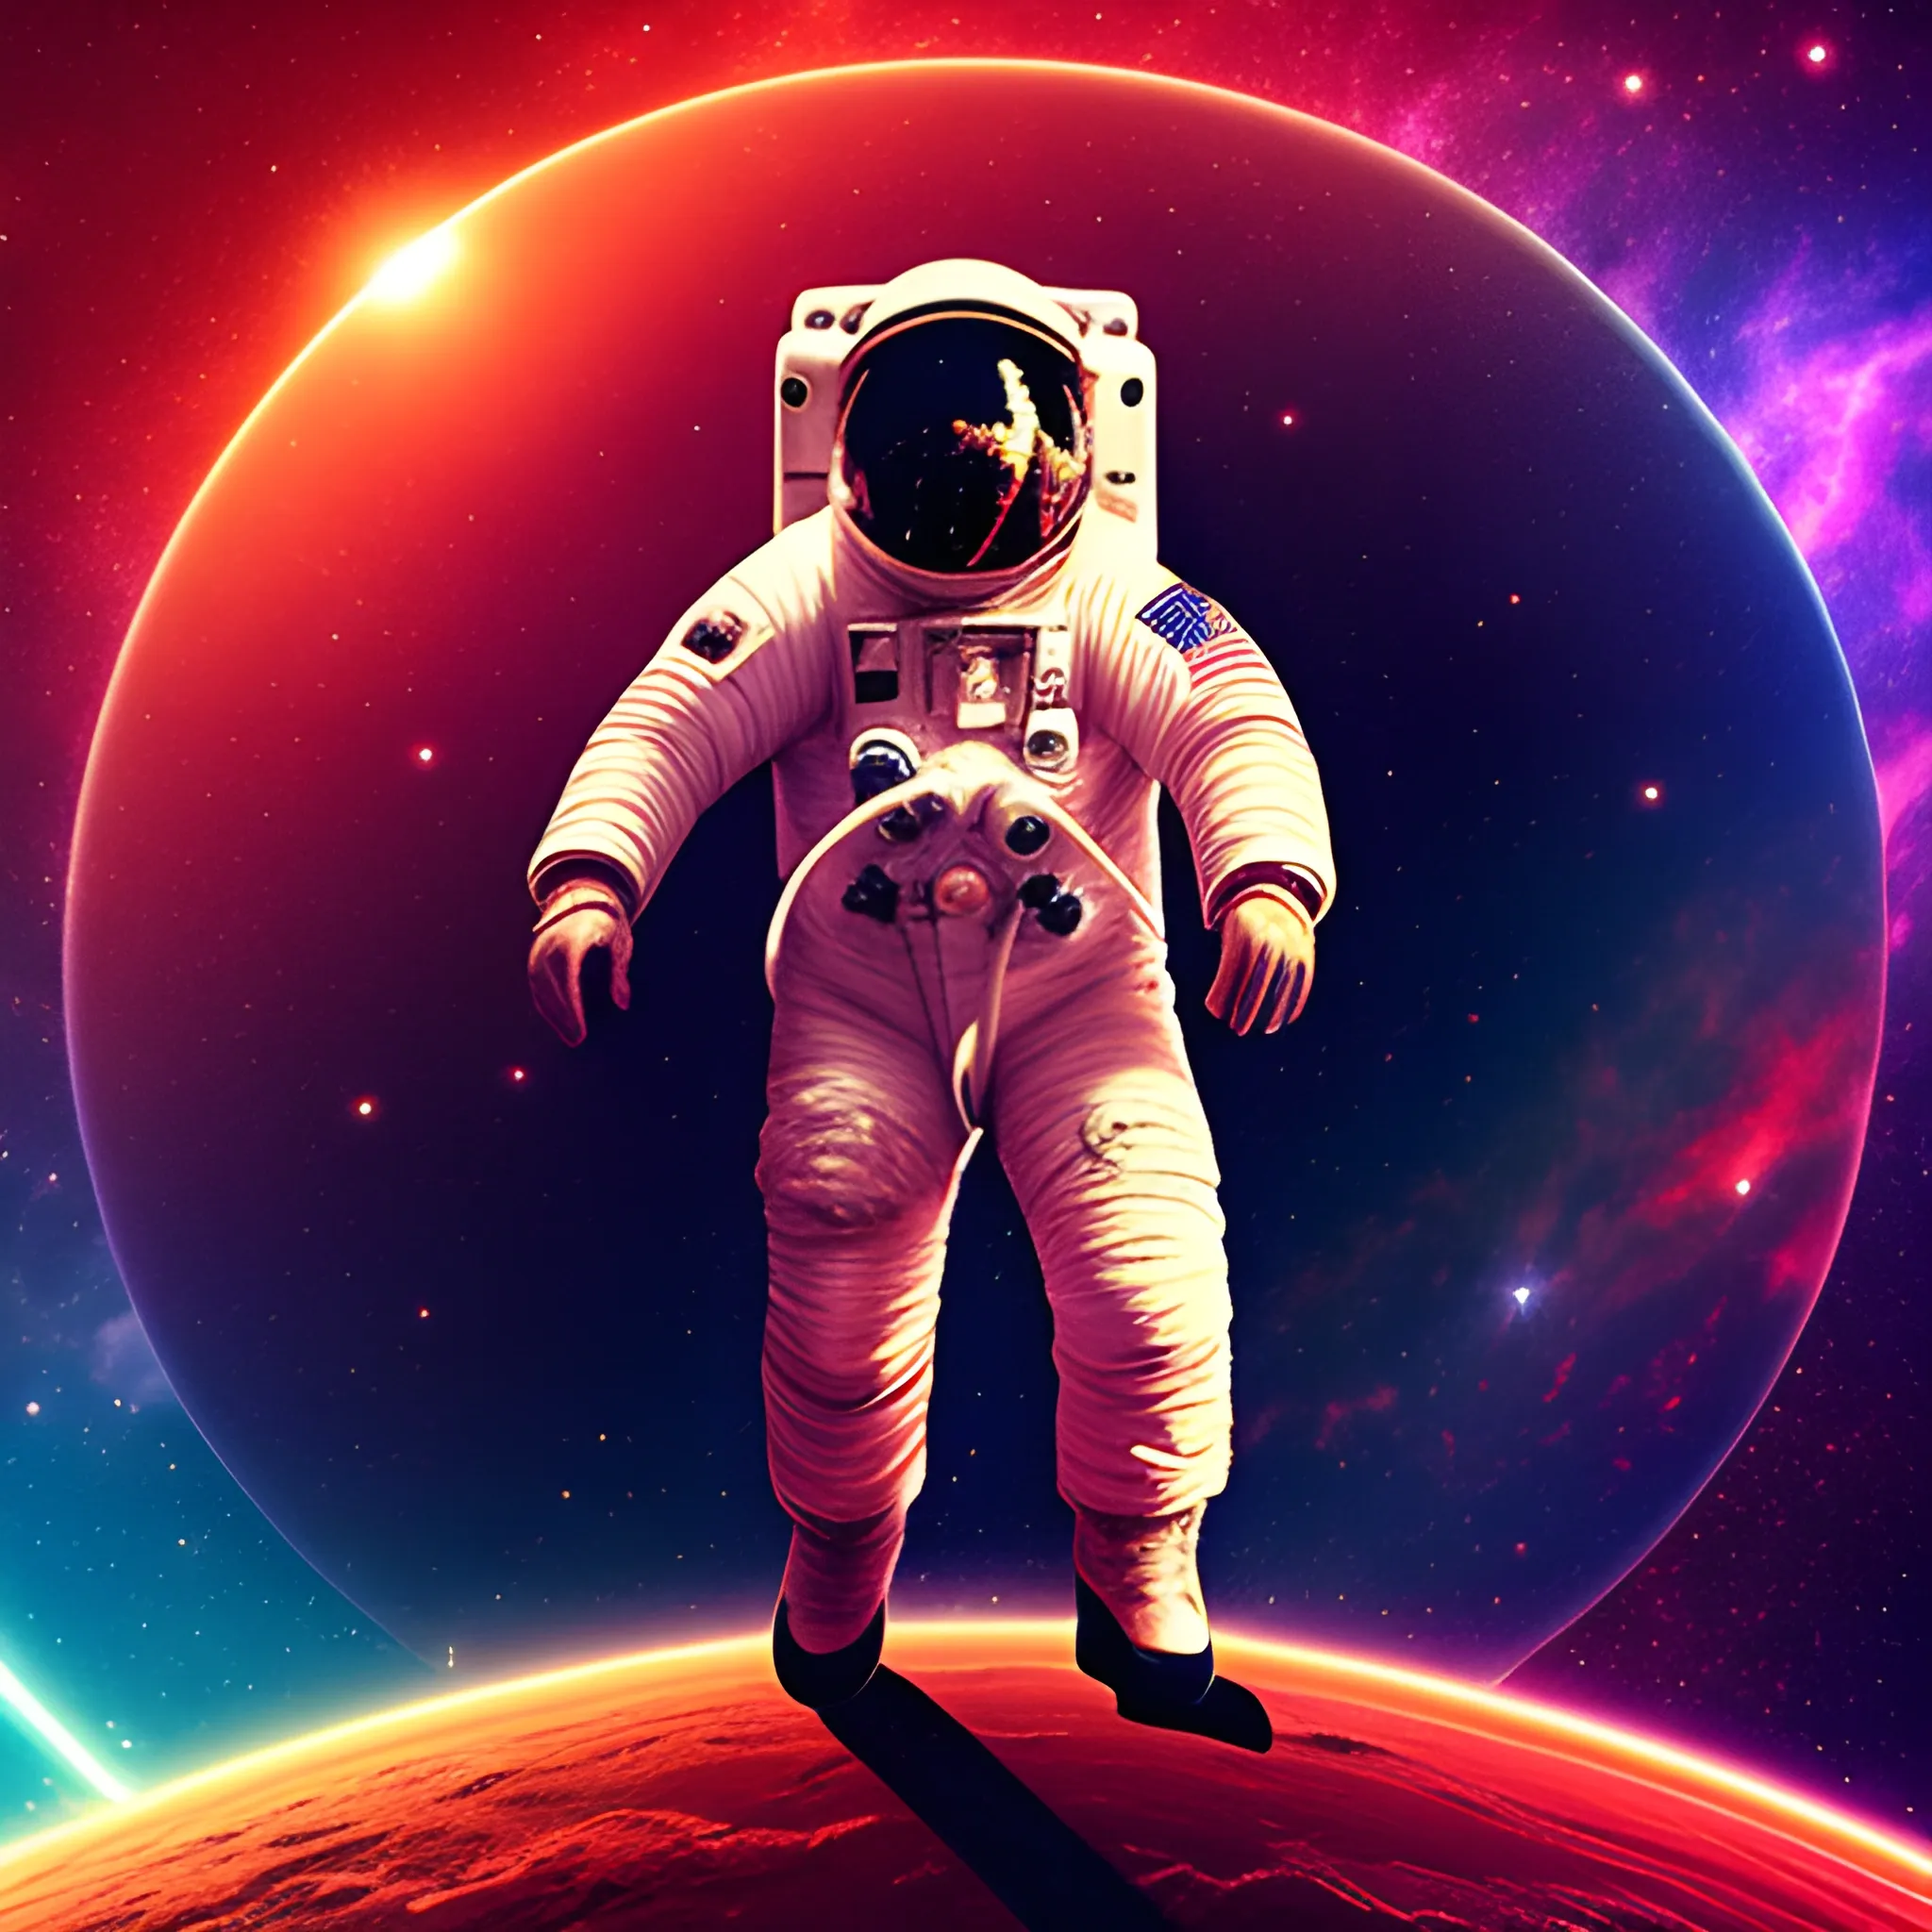 astronaut in planet superfice, red, galaxy background , Trippy 